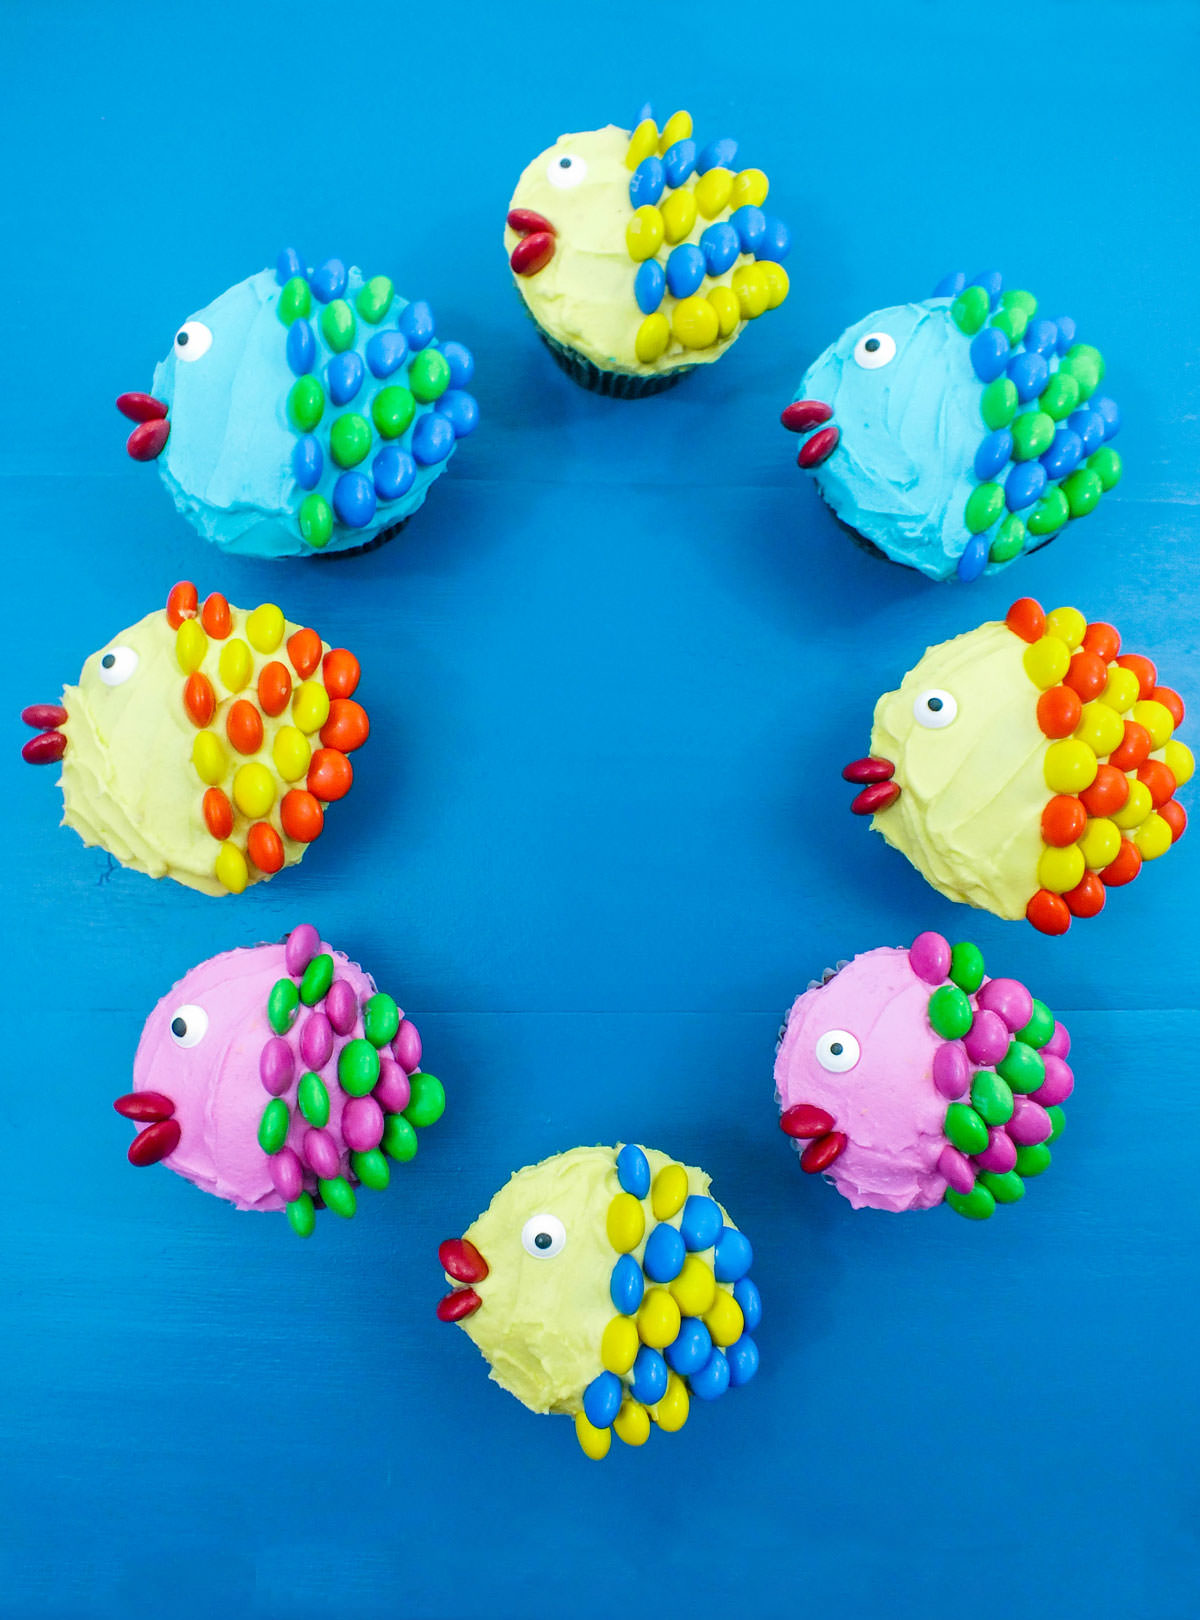 Eight Little Fishy Cupcakes arranged in a circle on a blue surface.